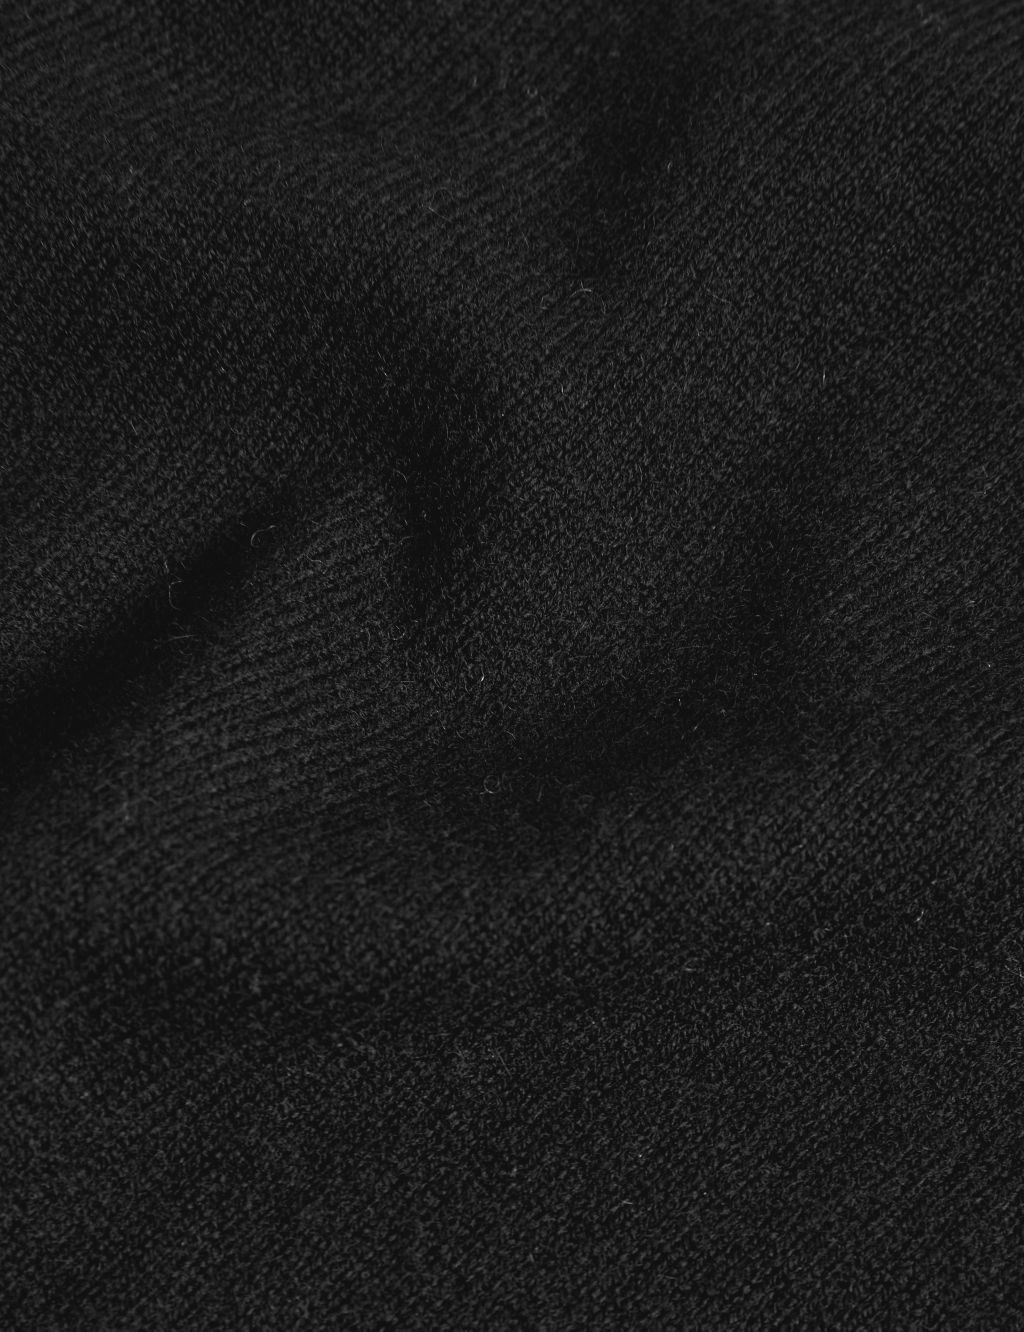 Merino Wool With Cashmere Knitted Top image 6